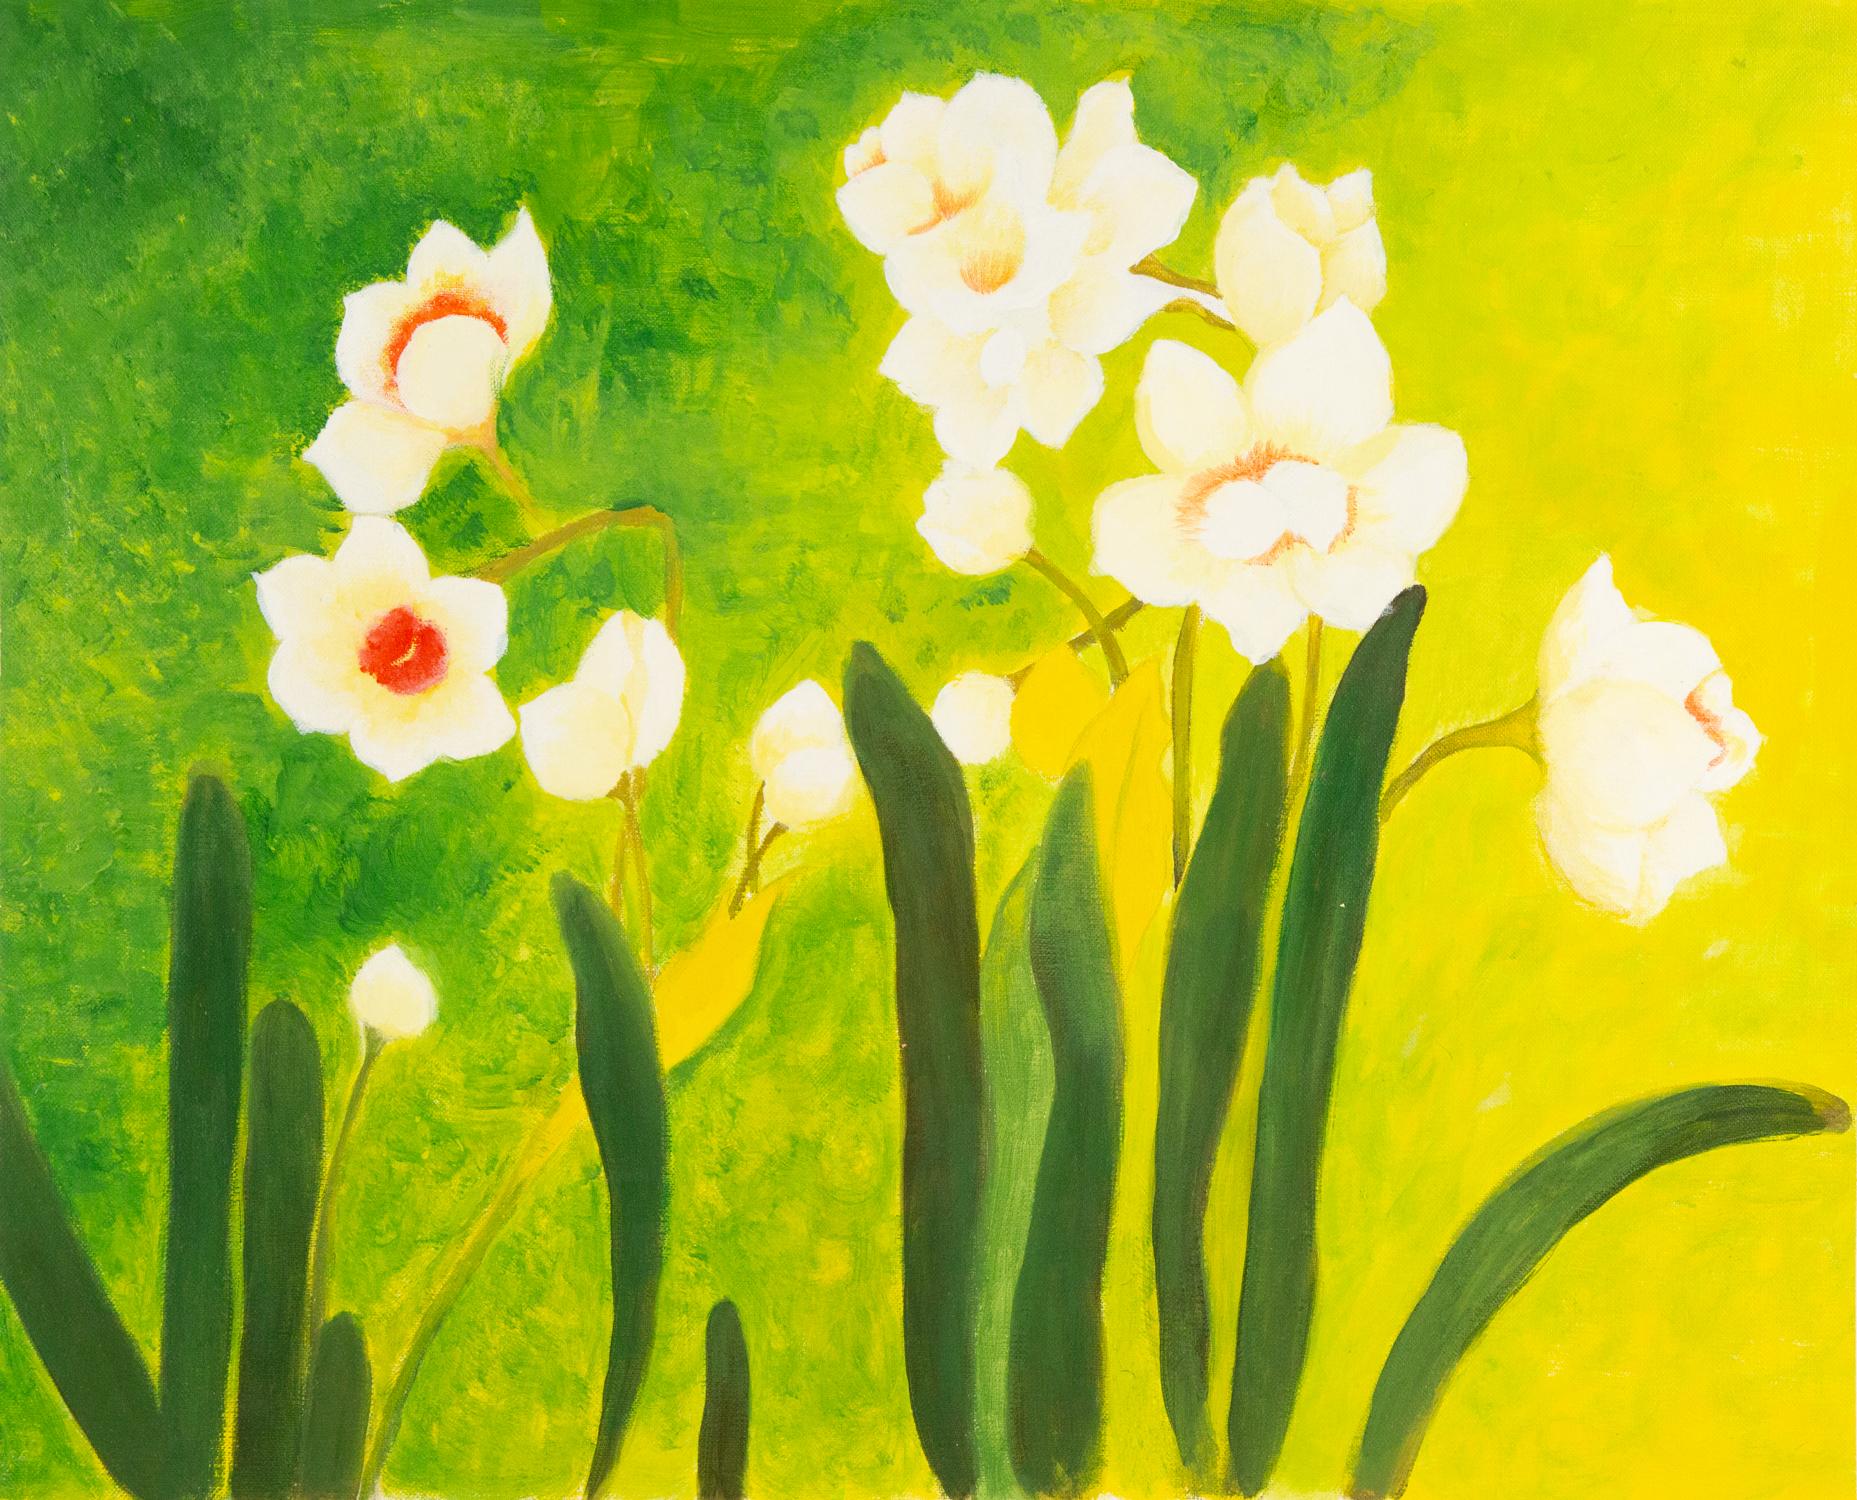 Title: Flower In Spring
Medium: Oil on canvas
Size: 20 x 24 inches
Frame: Framing options available!
Condition: The painting appears to be in excellent condition.
Note: This painting is unstretched
Year: 2000 Circa
Artist: Liu Shuang
Signature: